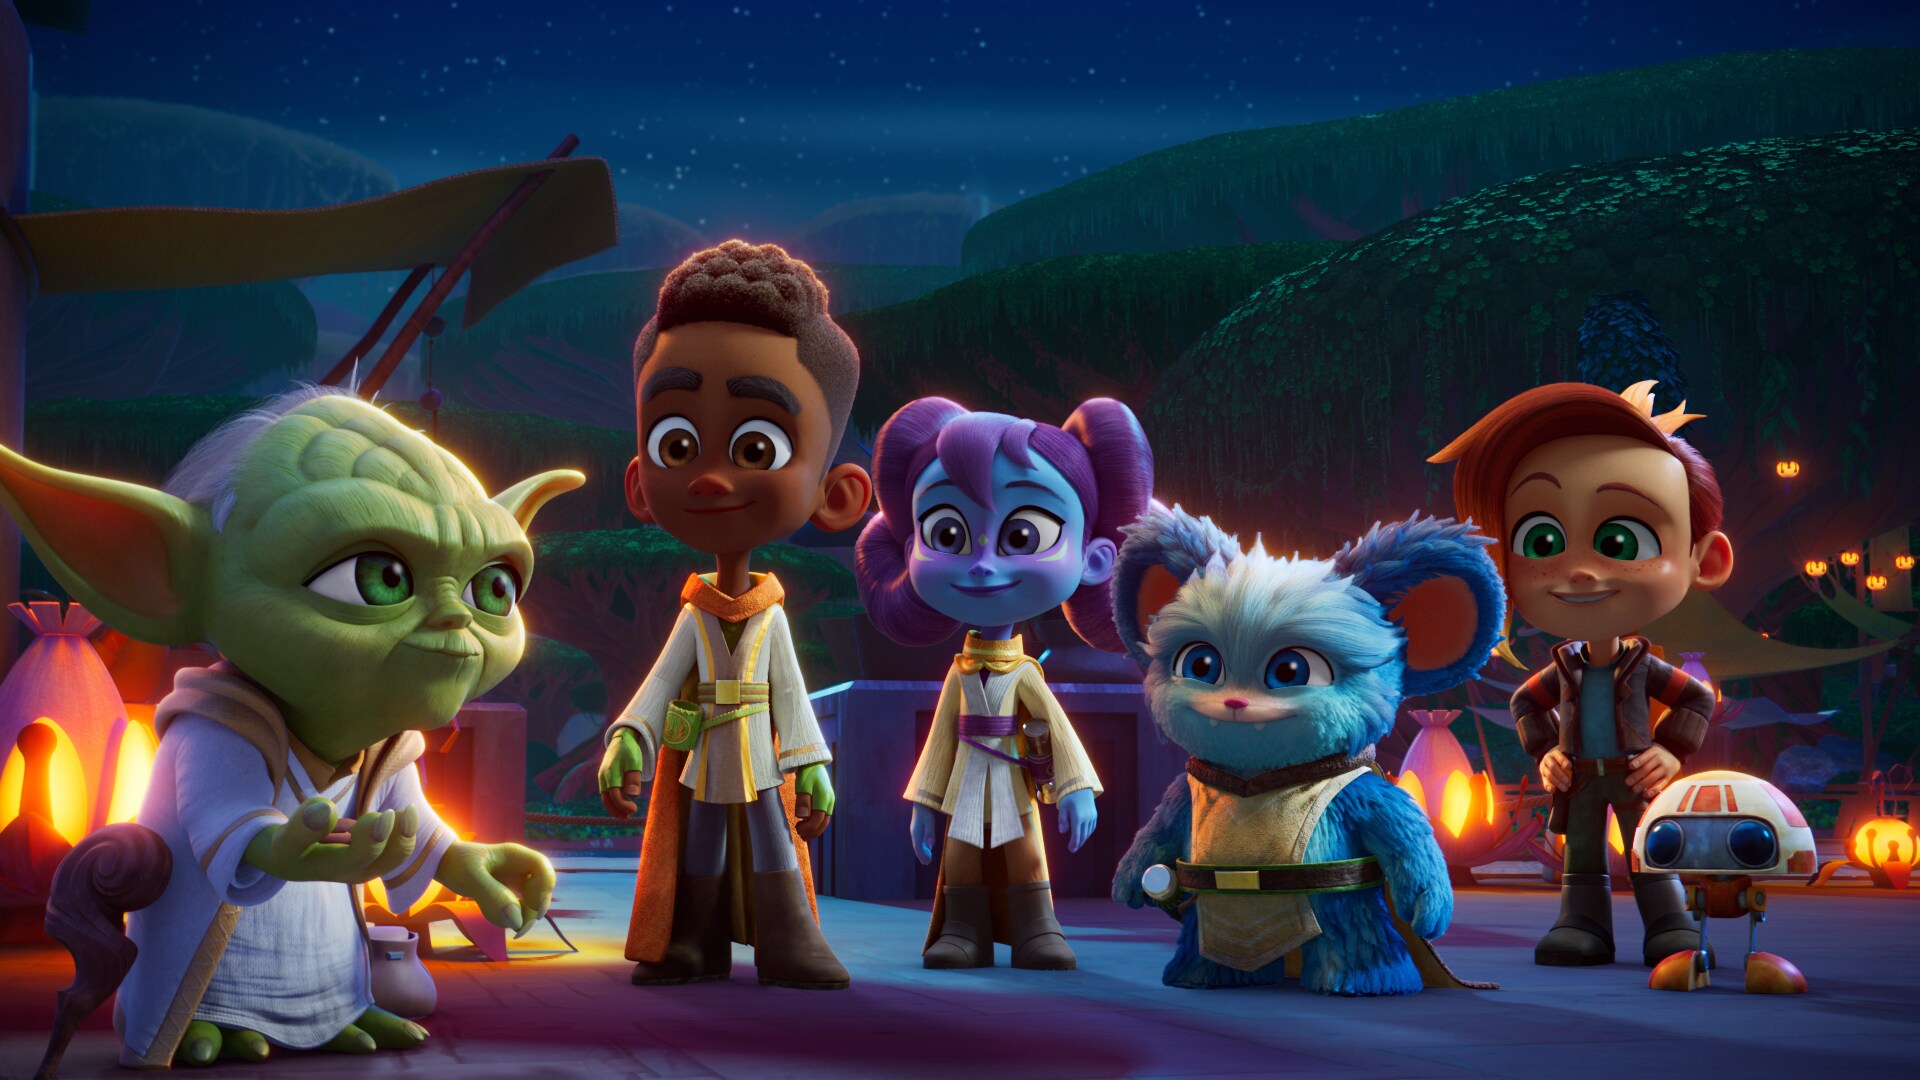 (L-R): Master Yoda (voiced by Piotr Michael) with Jedi Younglings, Kai Brightstar (voiced by Jamaal Avery Jr.), Lys Solay (voiced by Juliet Donenfeld) and Nubs (voiced by Dee Bradley Baker) and their friends Nash Durango (voiced by Emma Berman), and RJ-83 (voiced by Jonathan Lipow) on planet Tenoo, in a scene from "STAR WARS: YOUNG JEDI ADVENTURES" exclusively on Disney+ and Disney Junior. ©2023 Lucasfilm Ltd. & TM. All Rights Reserved.